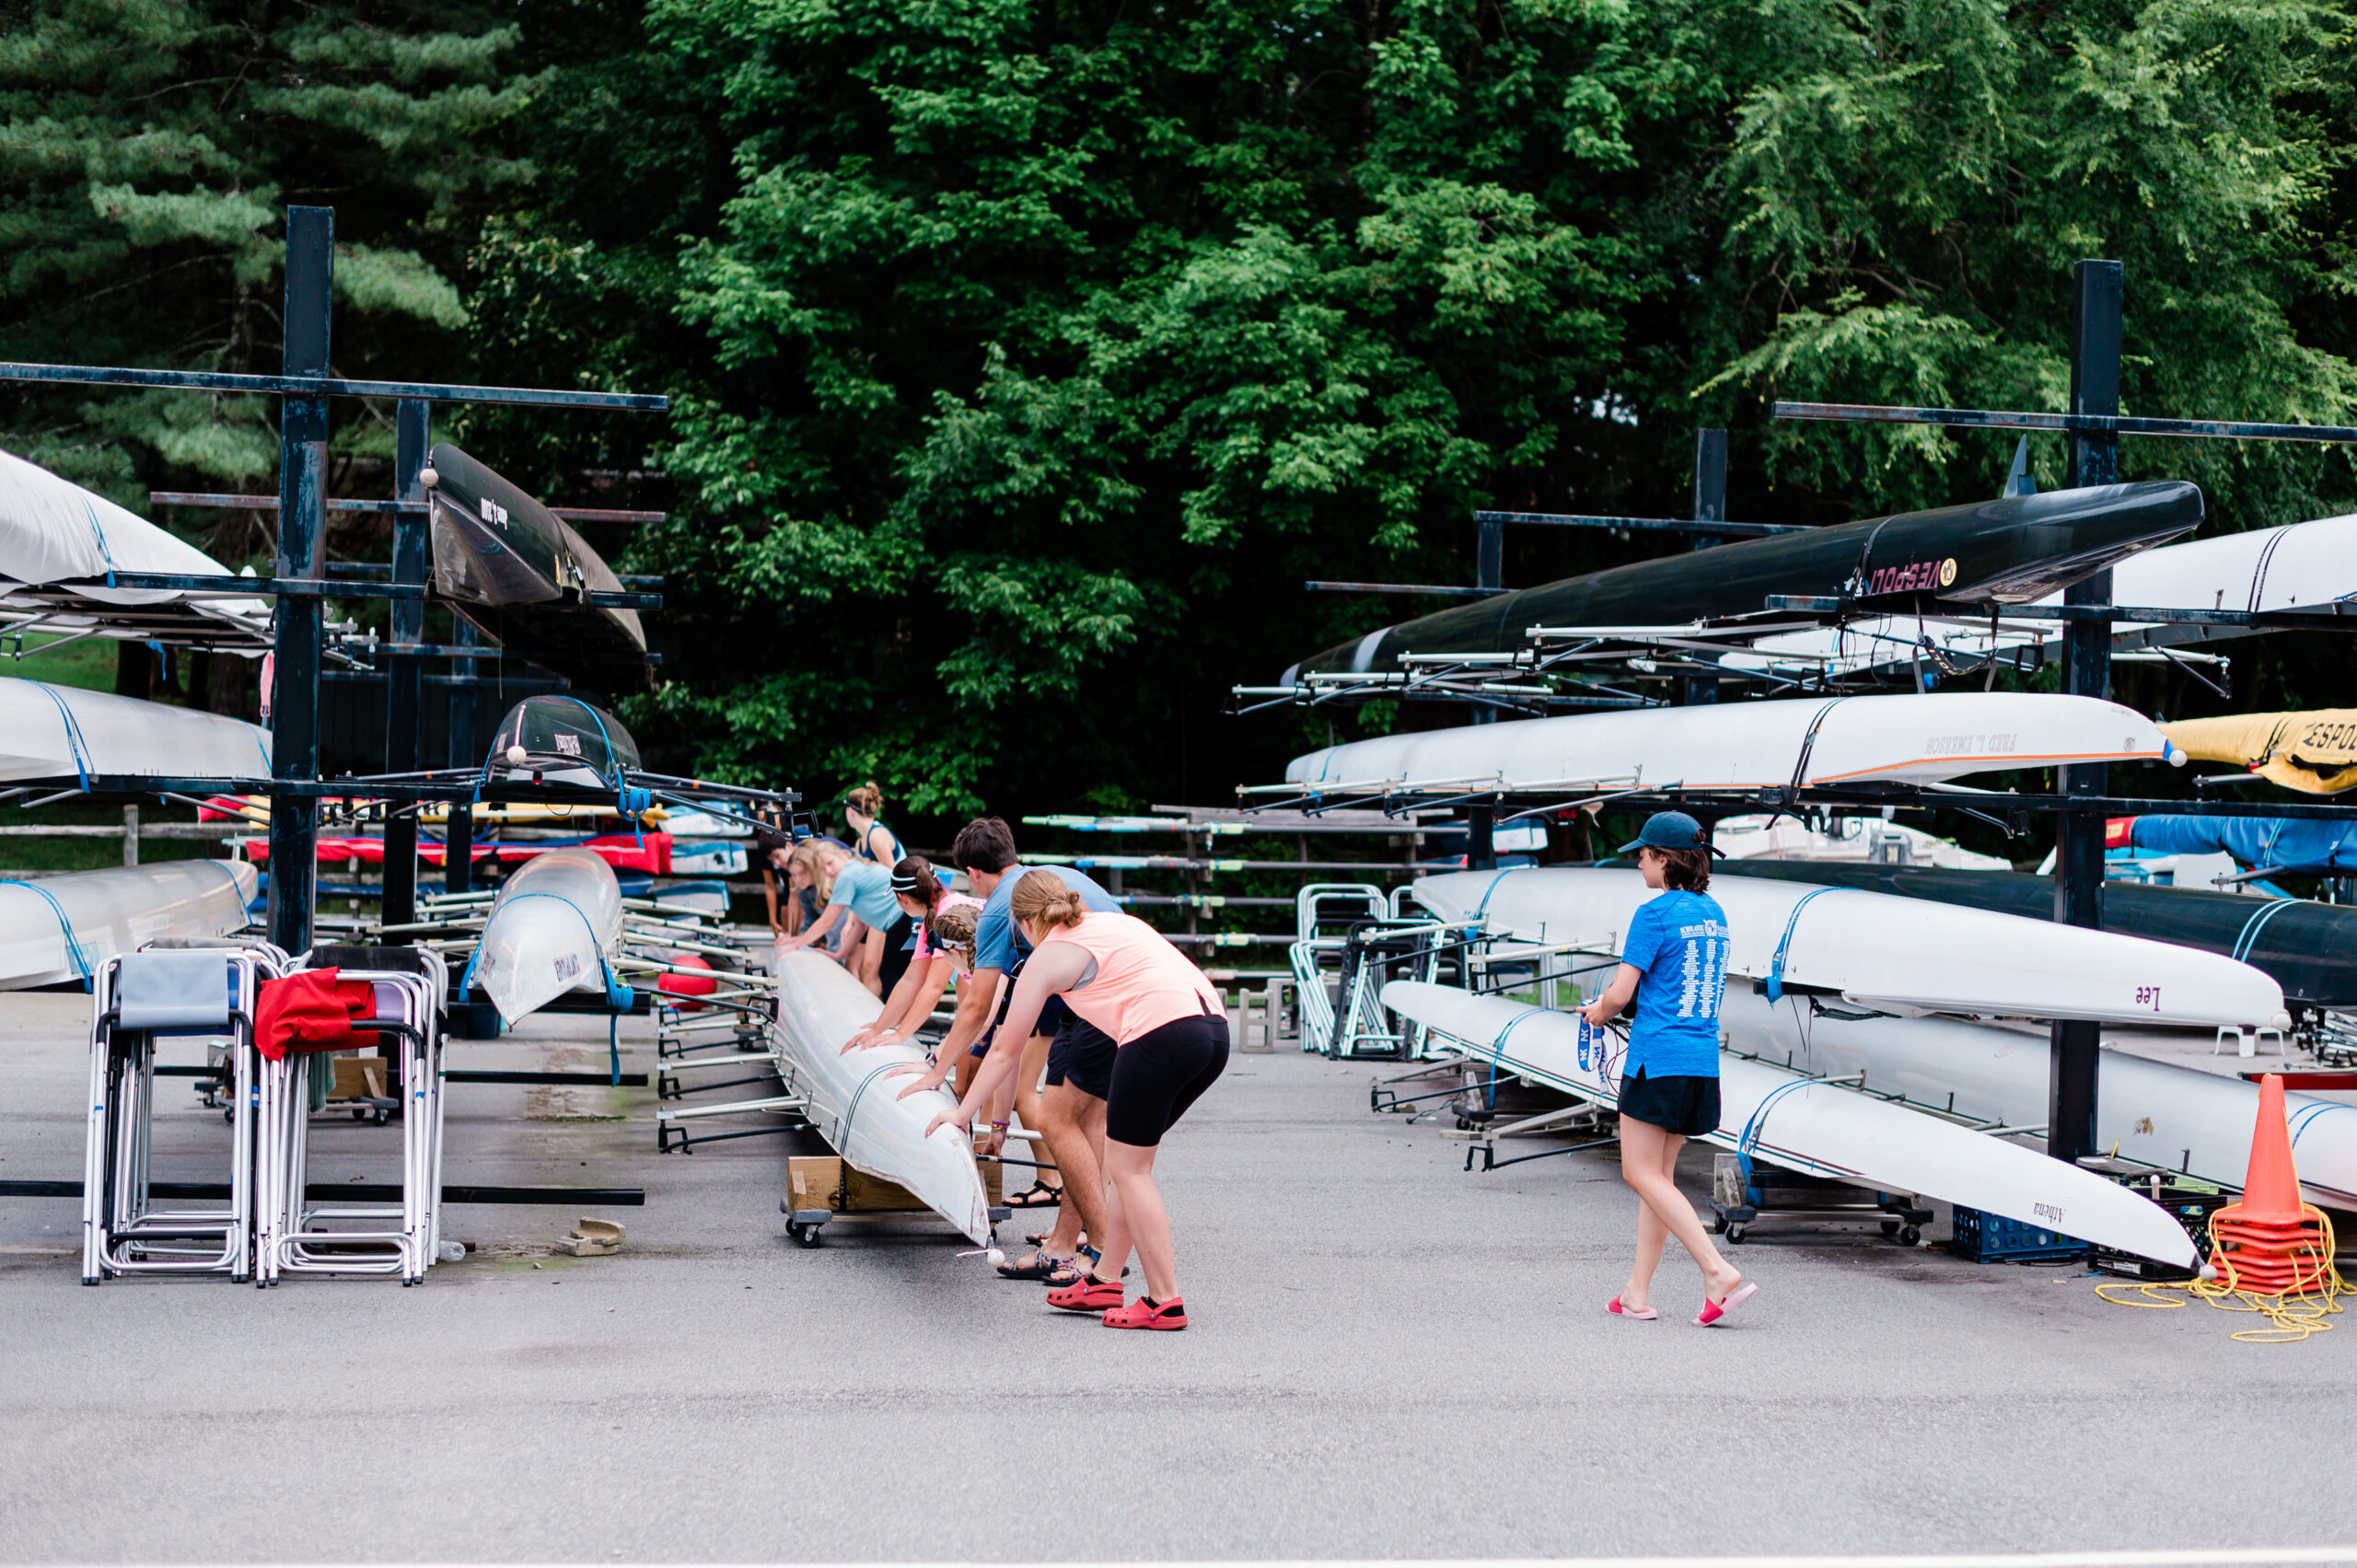 A crew team of rowers in High Point, NC pick up a boat to move it to the lake.